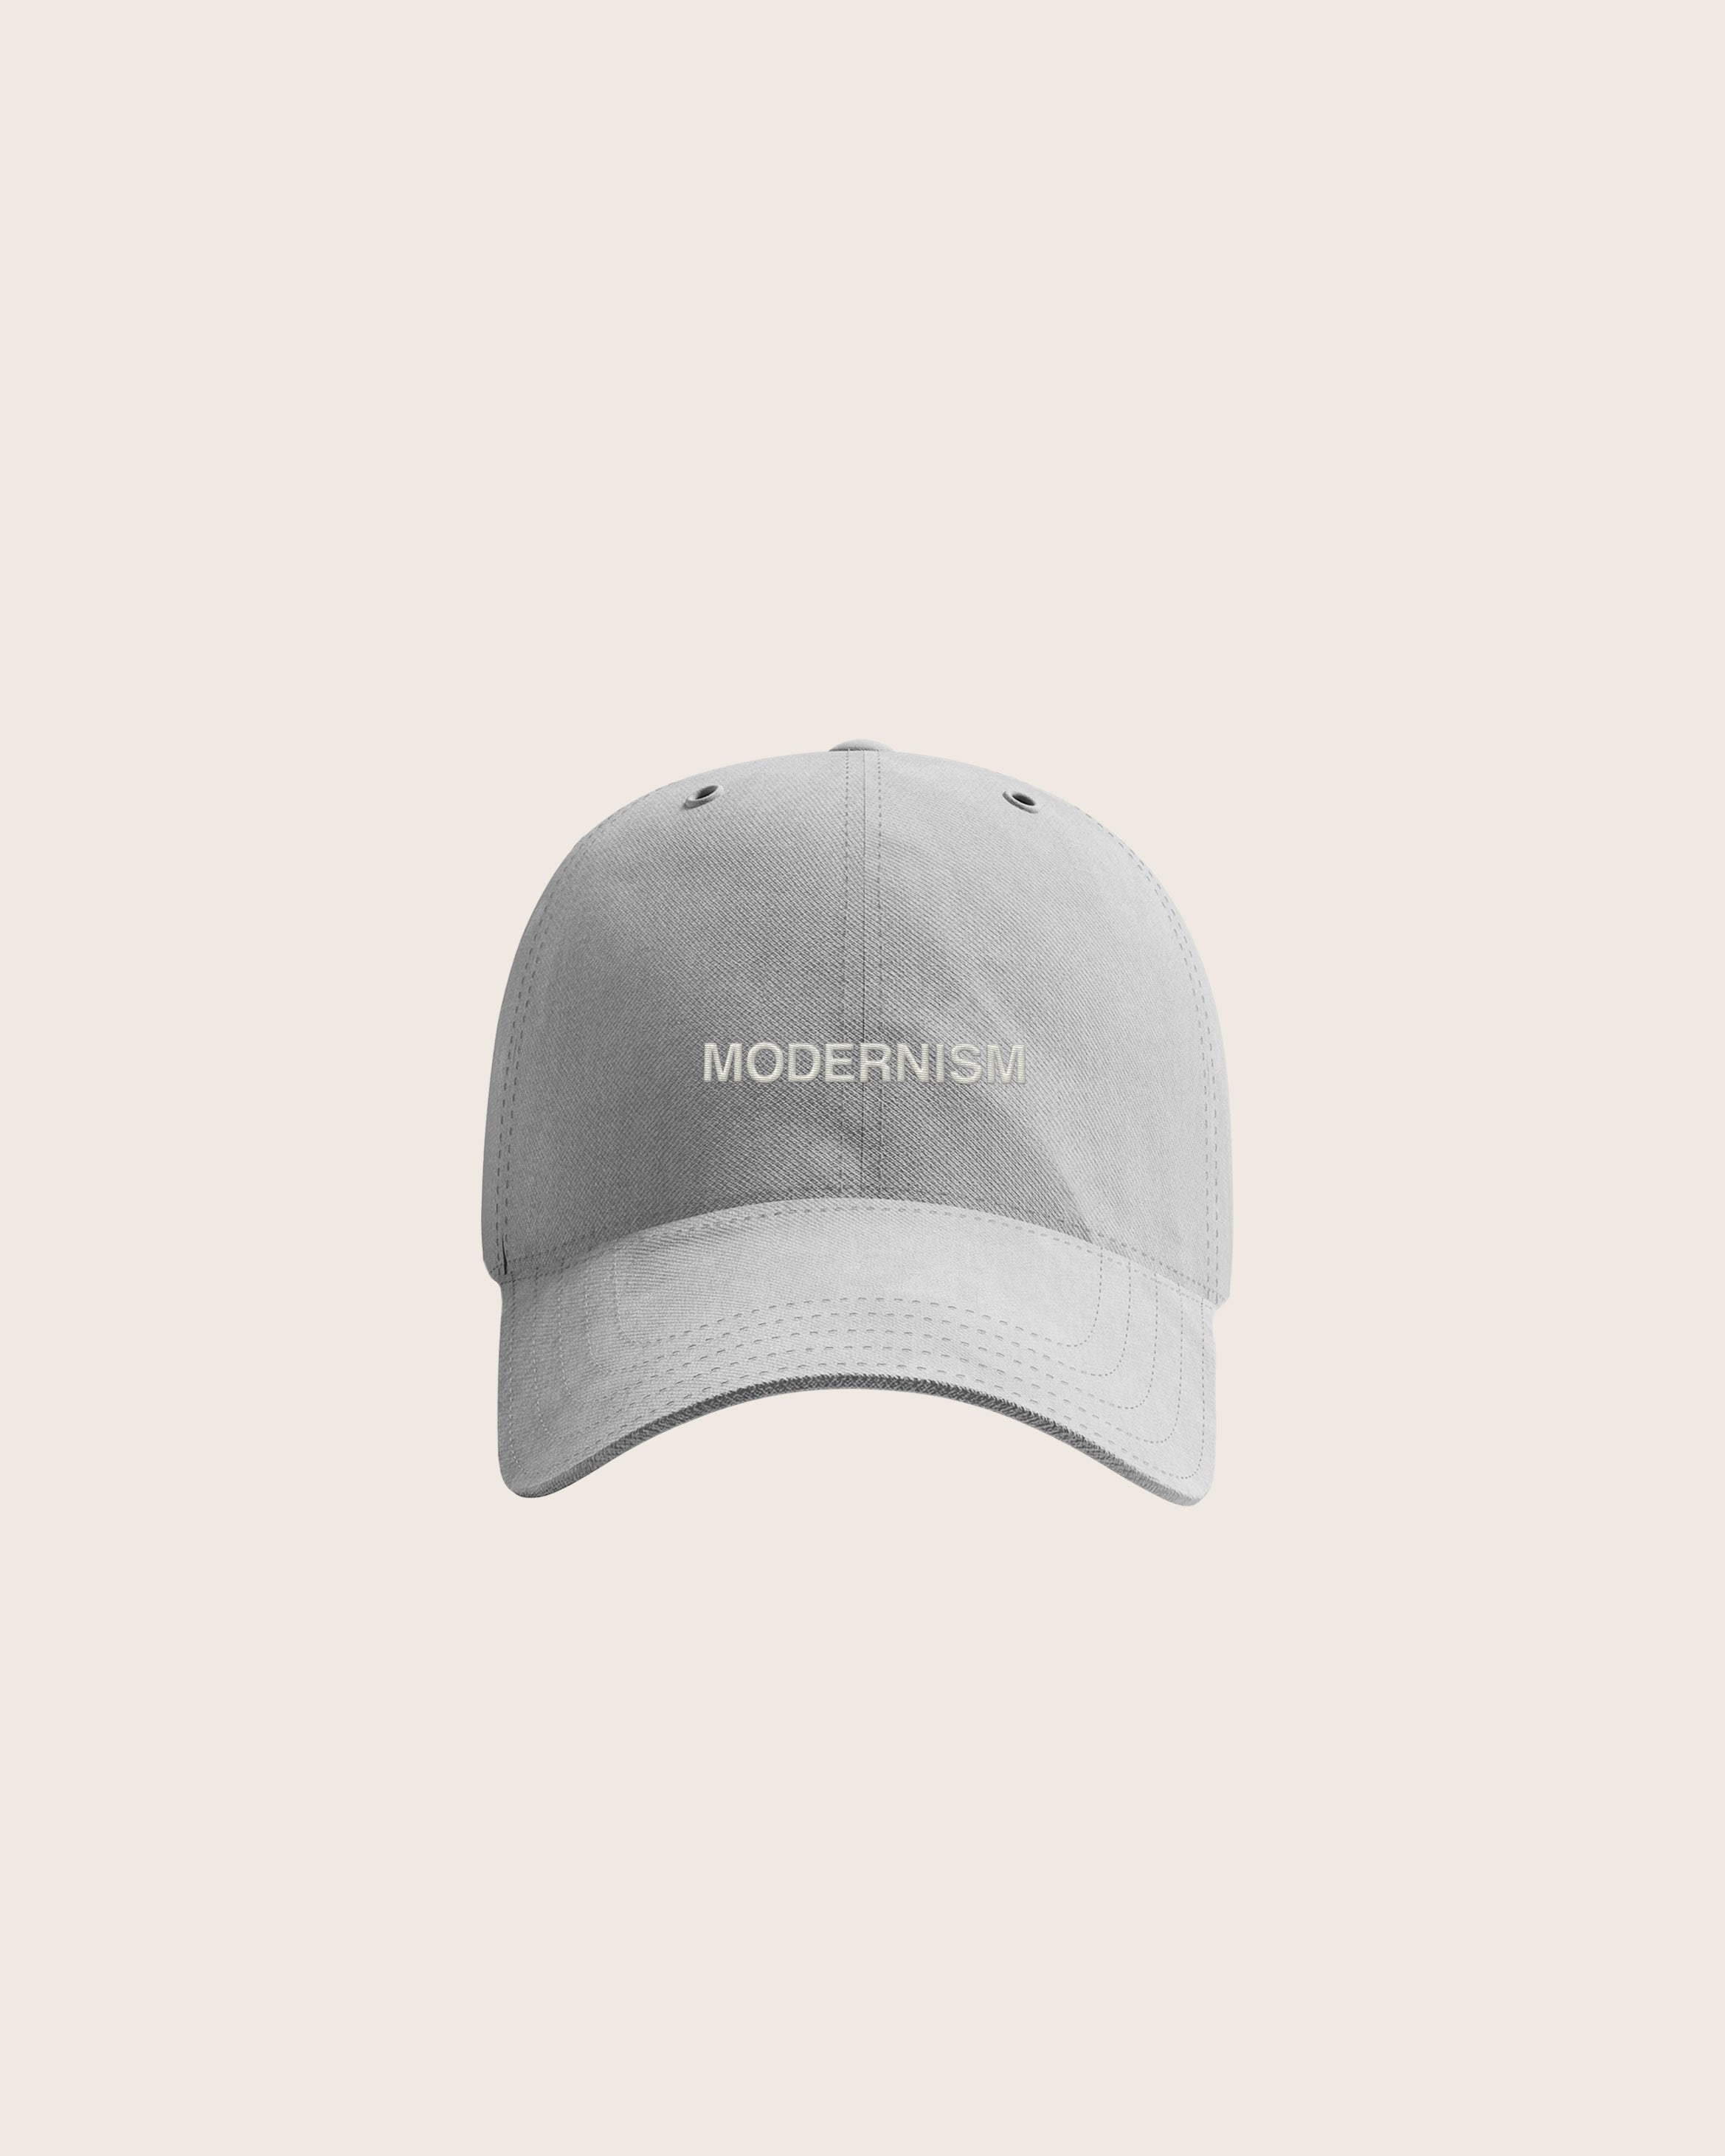 Gray Baseball Cap / Dad Hat with Modernism Art Movement Text Embroidery on Front. 100% Cotton.